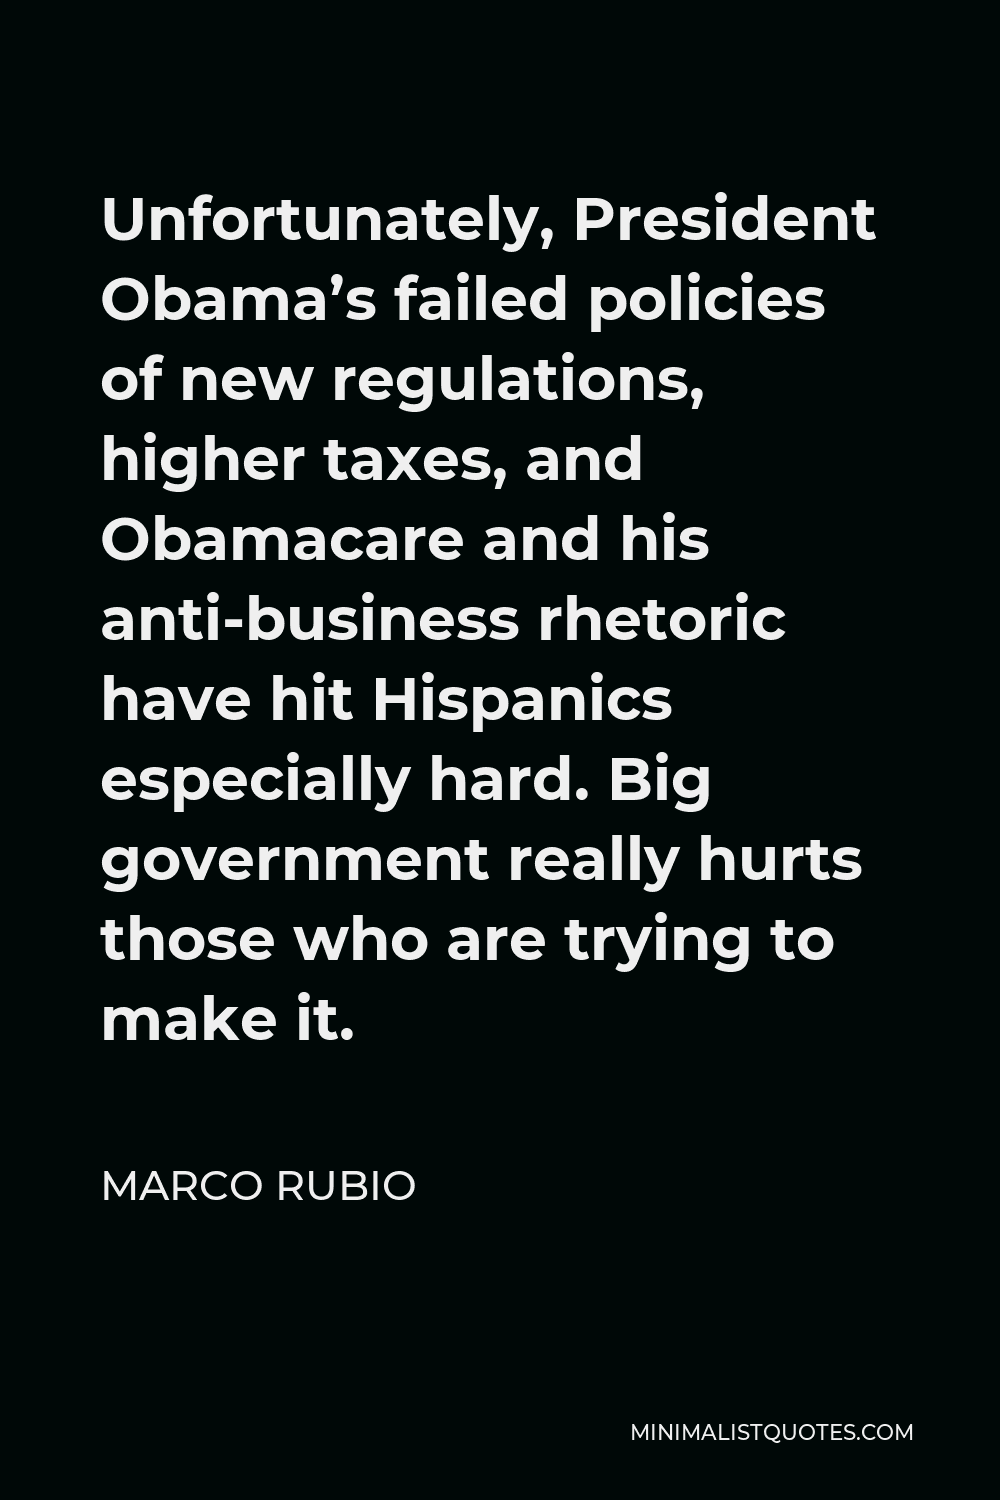 Marco Rubio Quote - Unfortunately, President Obama’s failed policies of new regulations, higher taxes, and Obamacare and his anti-business rhetoric have hit Hispanics especially hard. Big government really hurts those who are trying to make it.